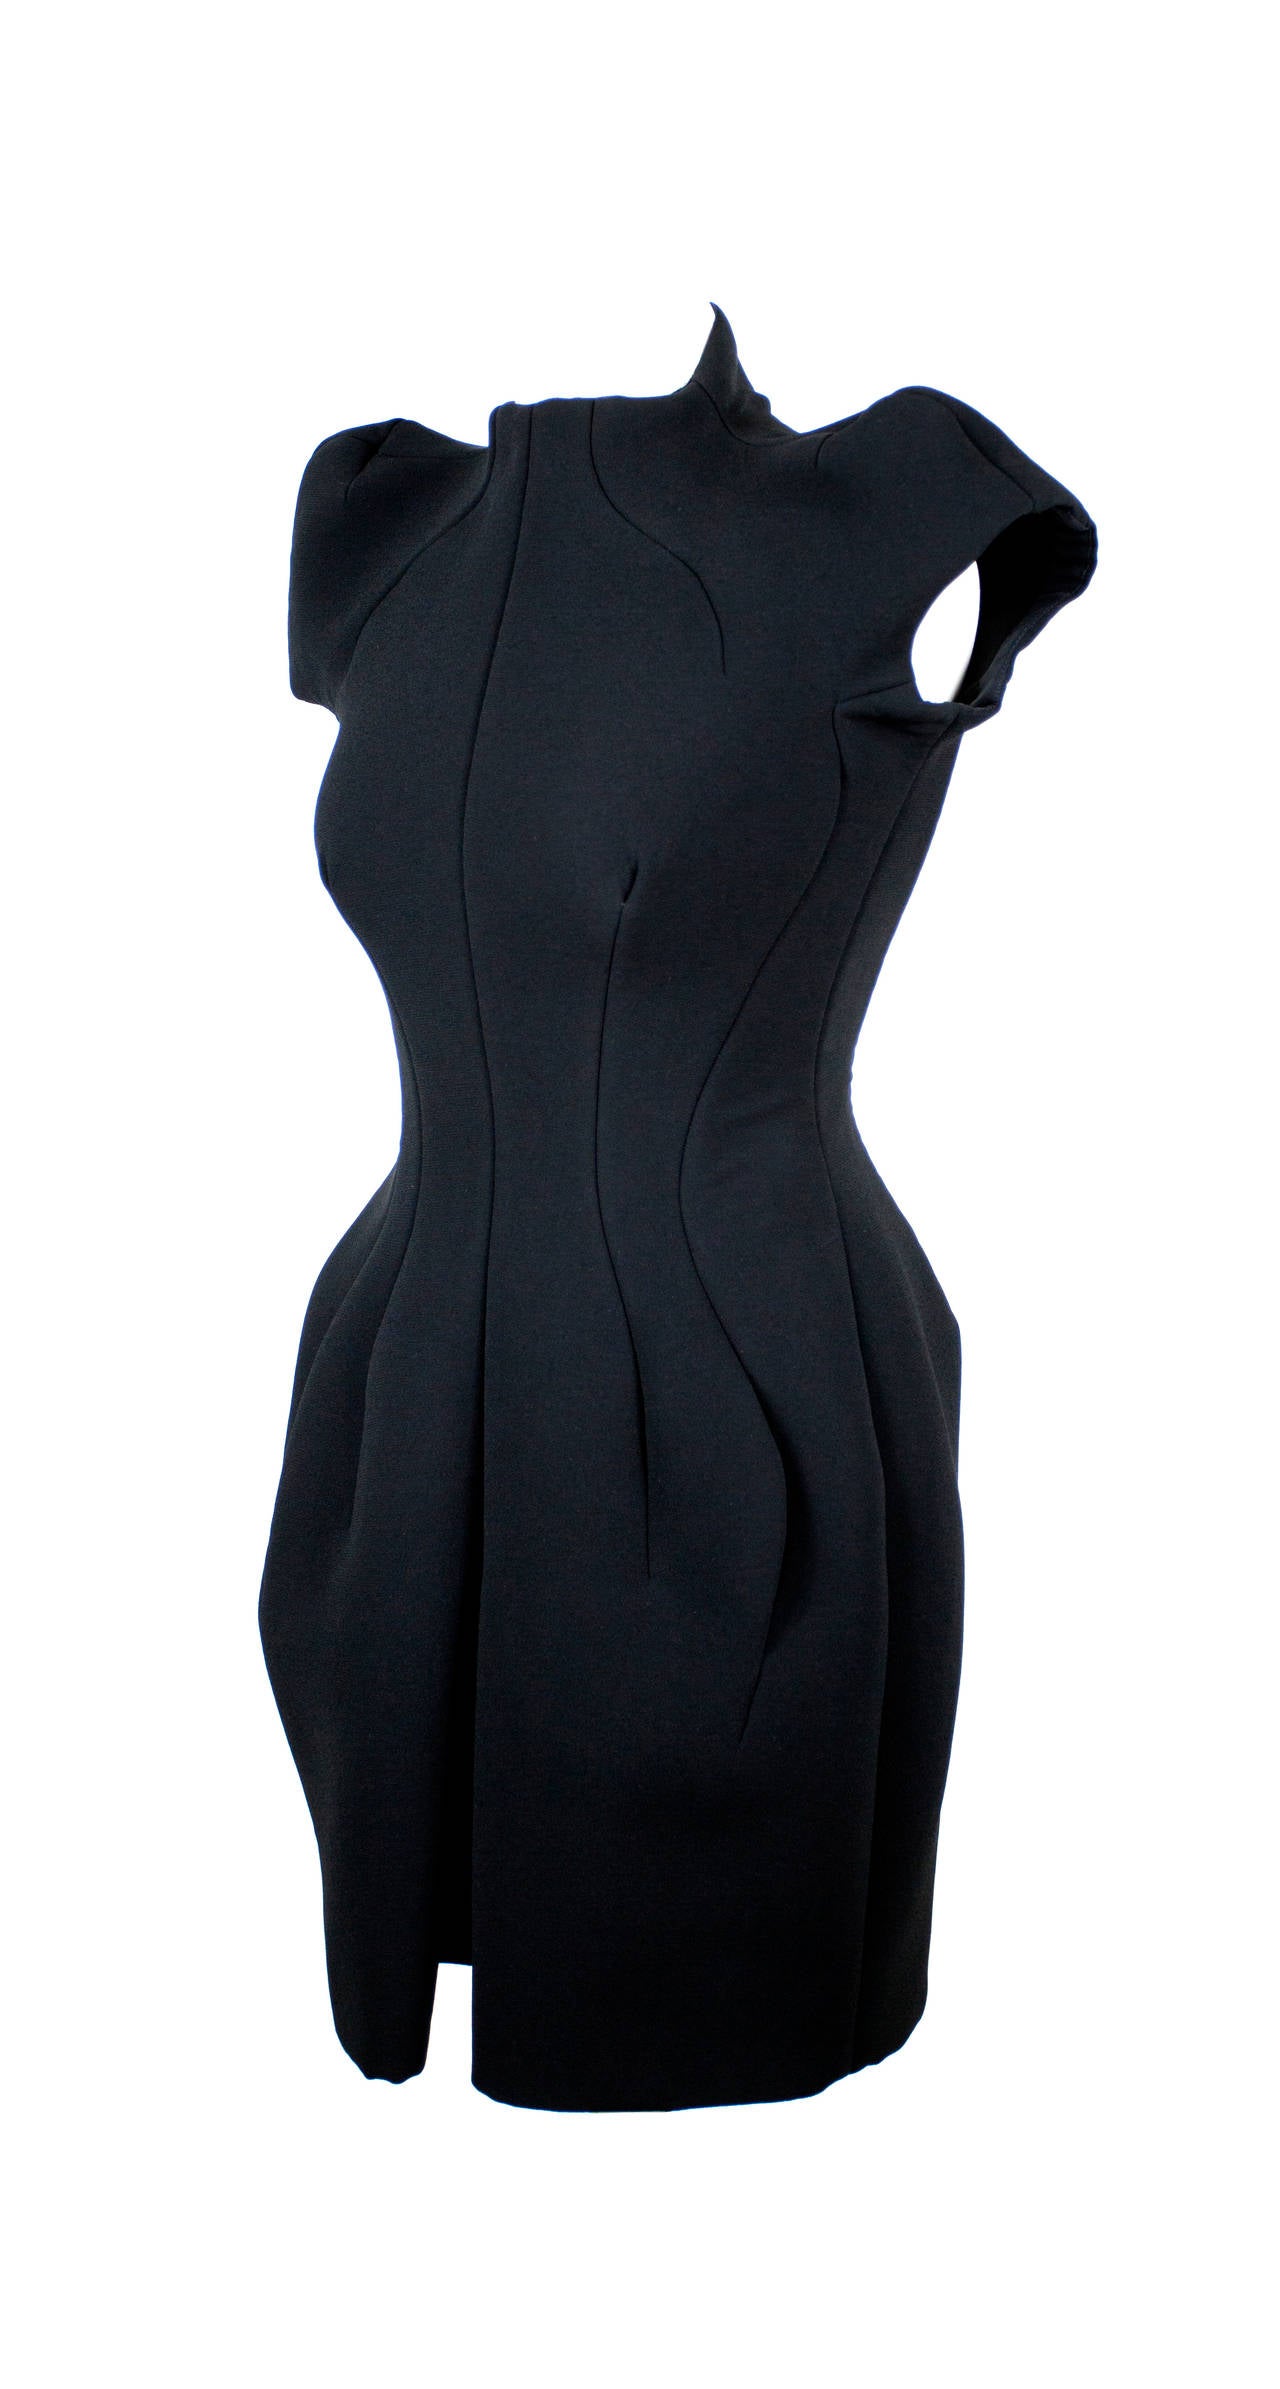 Vintage Balenciaga by Nicolas Ghesquière Diabolic black fitted dress from Spring 2008. Iconic collection from Nicolas Ghesquière, all seams are made to float or stand away from body as if they were floating. The structure of dress is made from